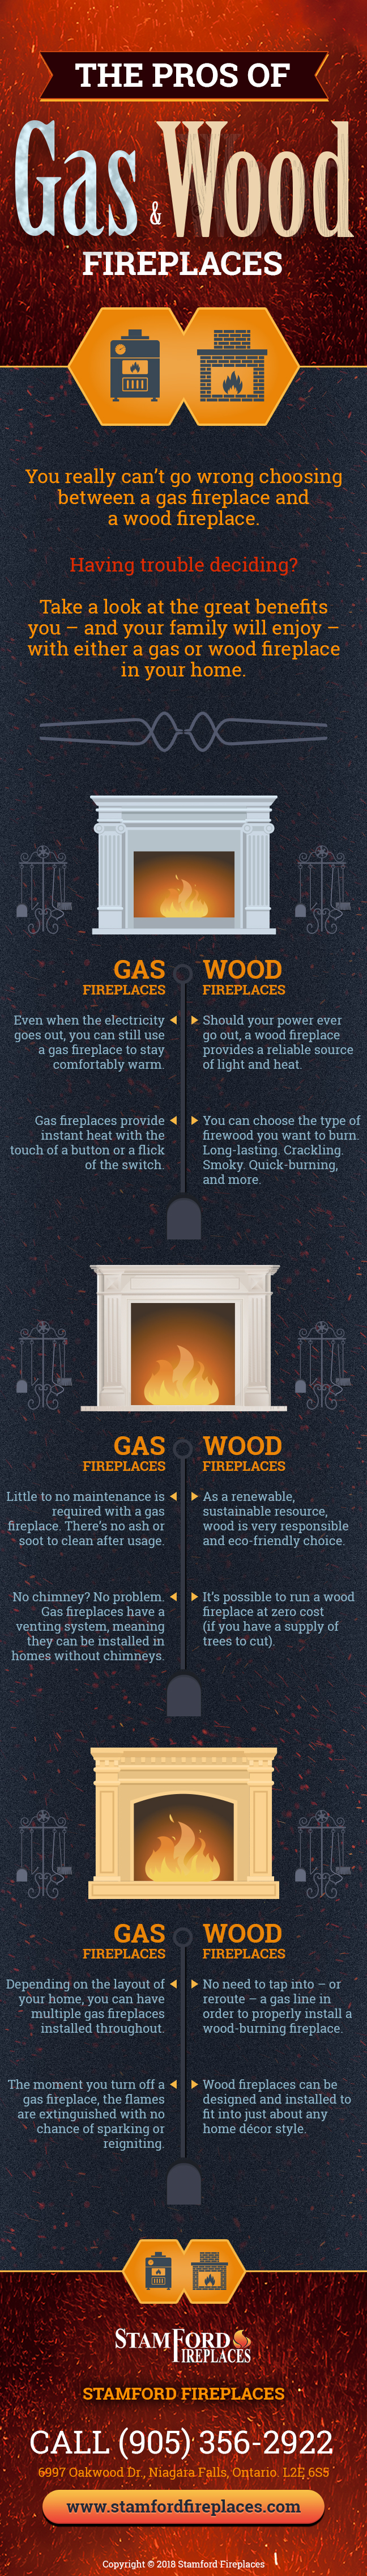 Pros of Gas and Wood Fireplaces